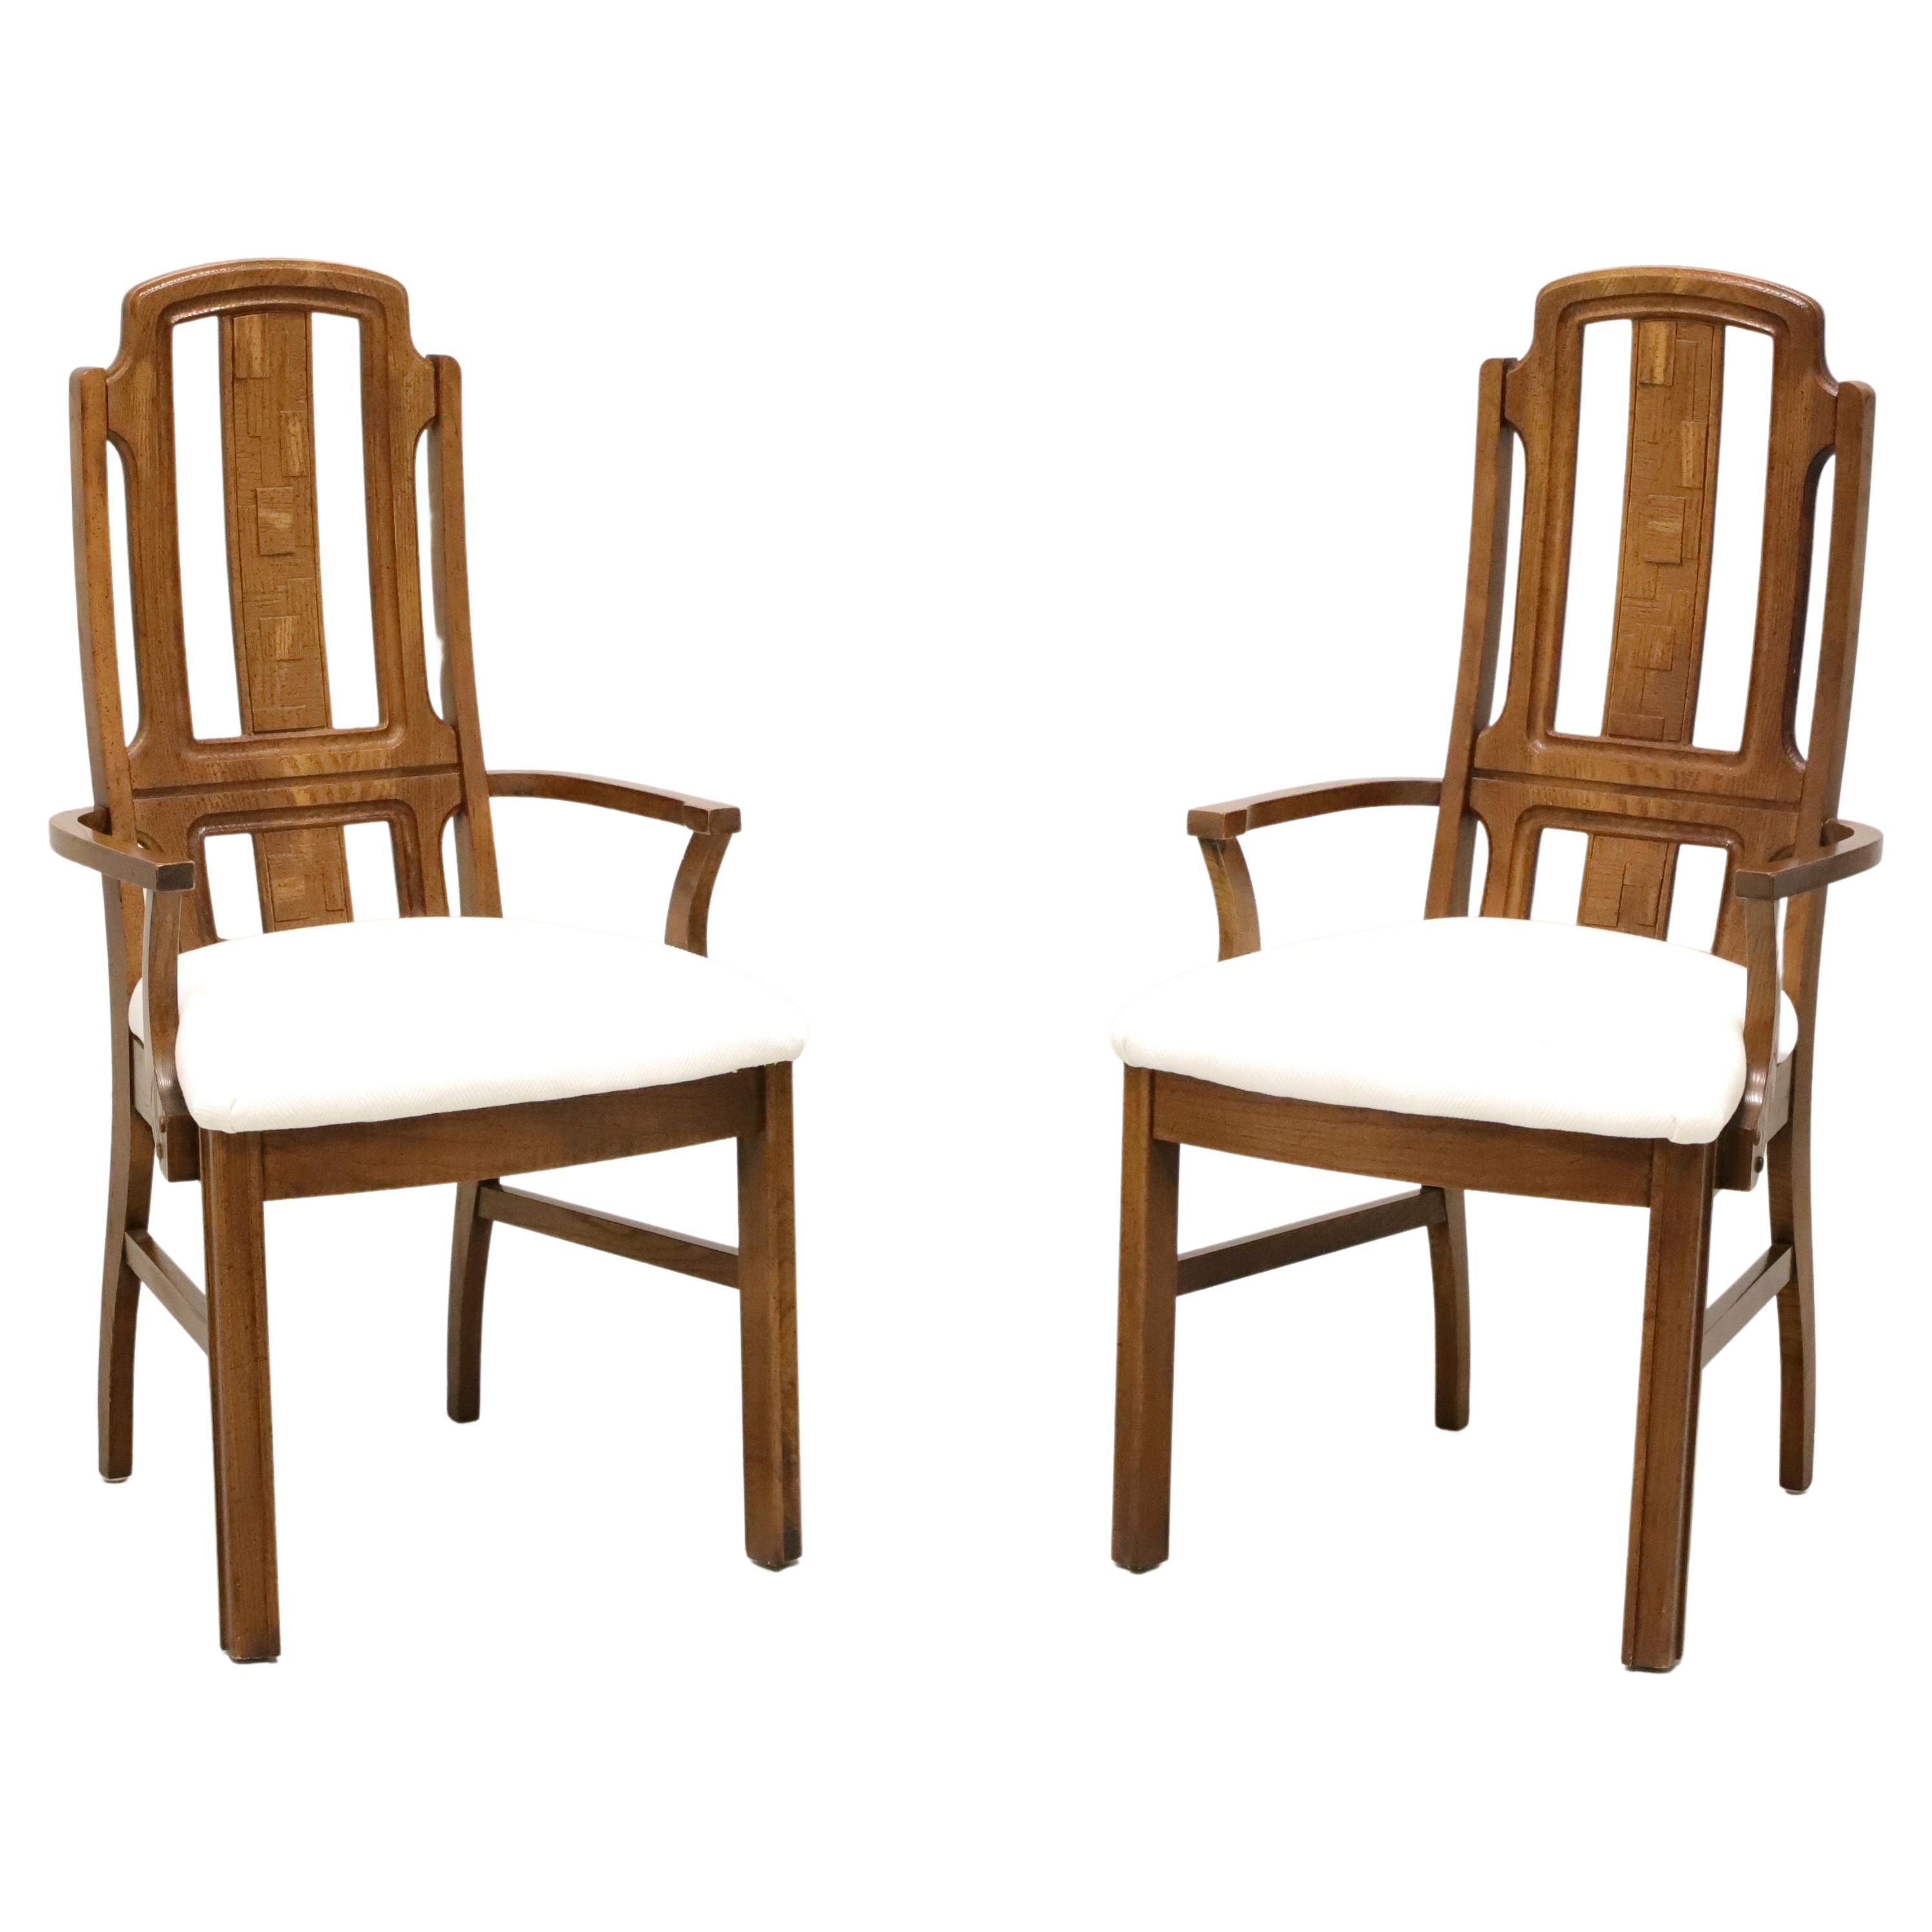 BROYHILL PREMIER Mid 20th Century Oak Brutalist Style Dining Armchairs - Pair For Sale